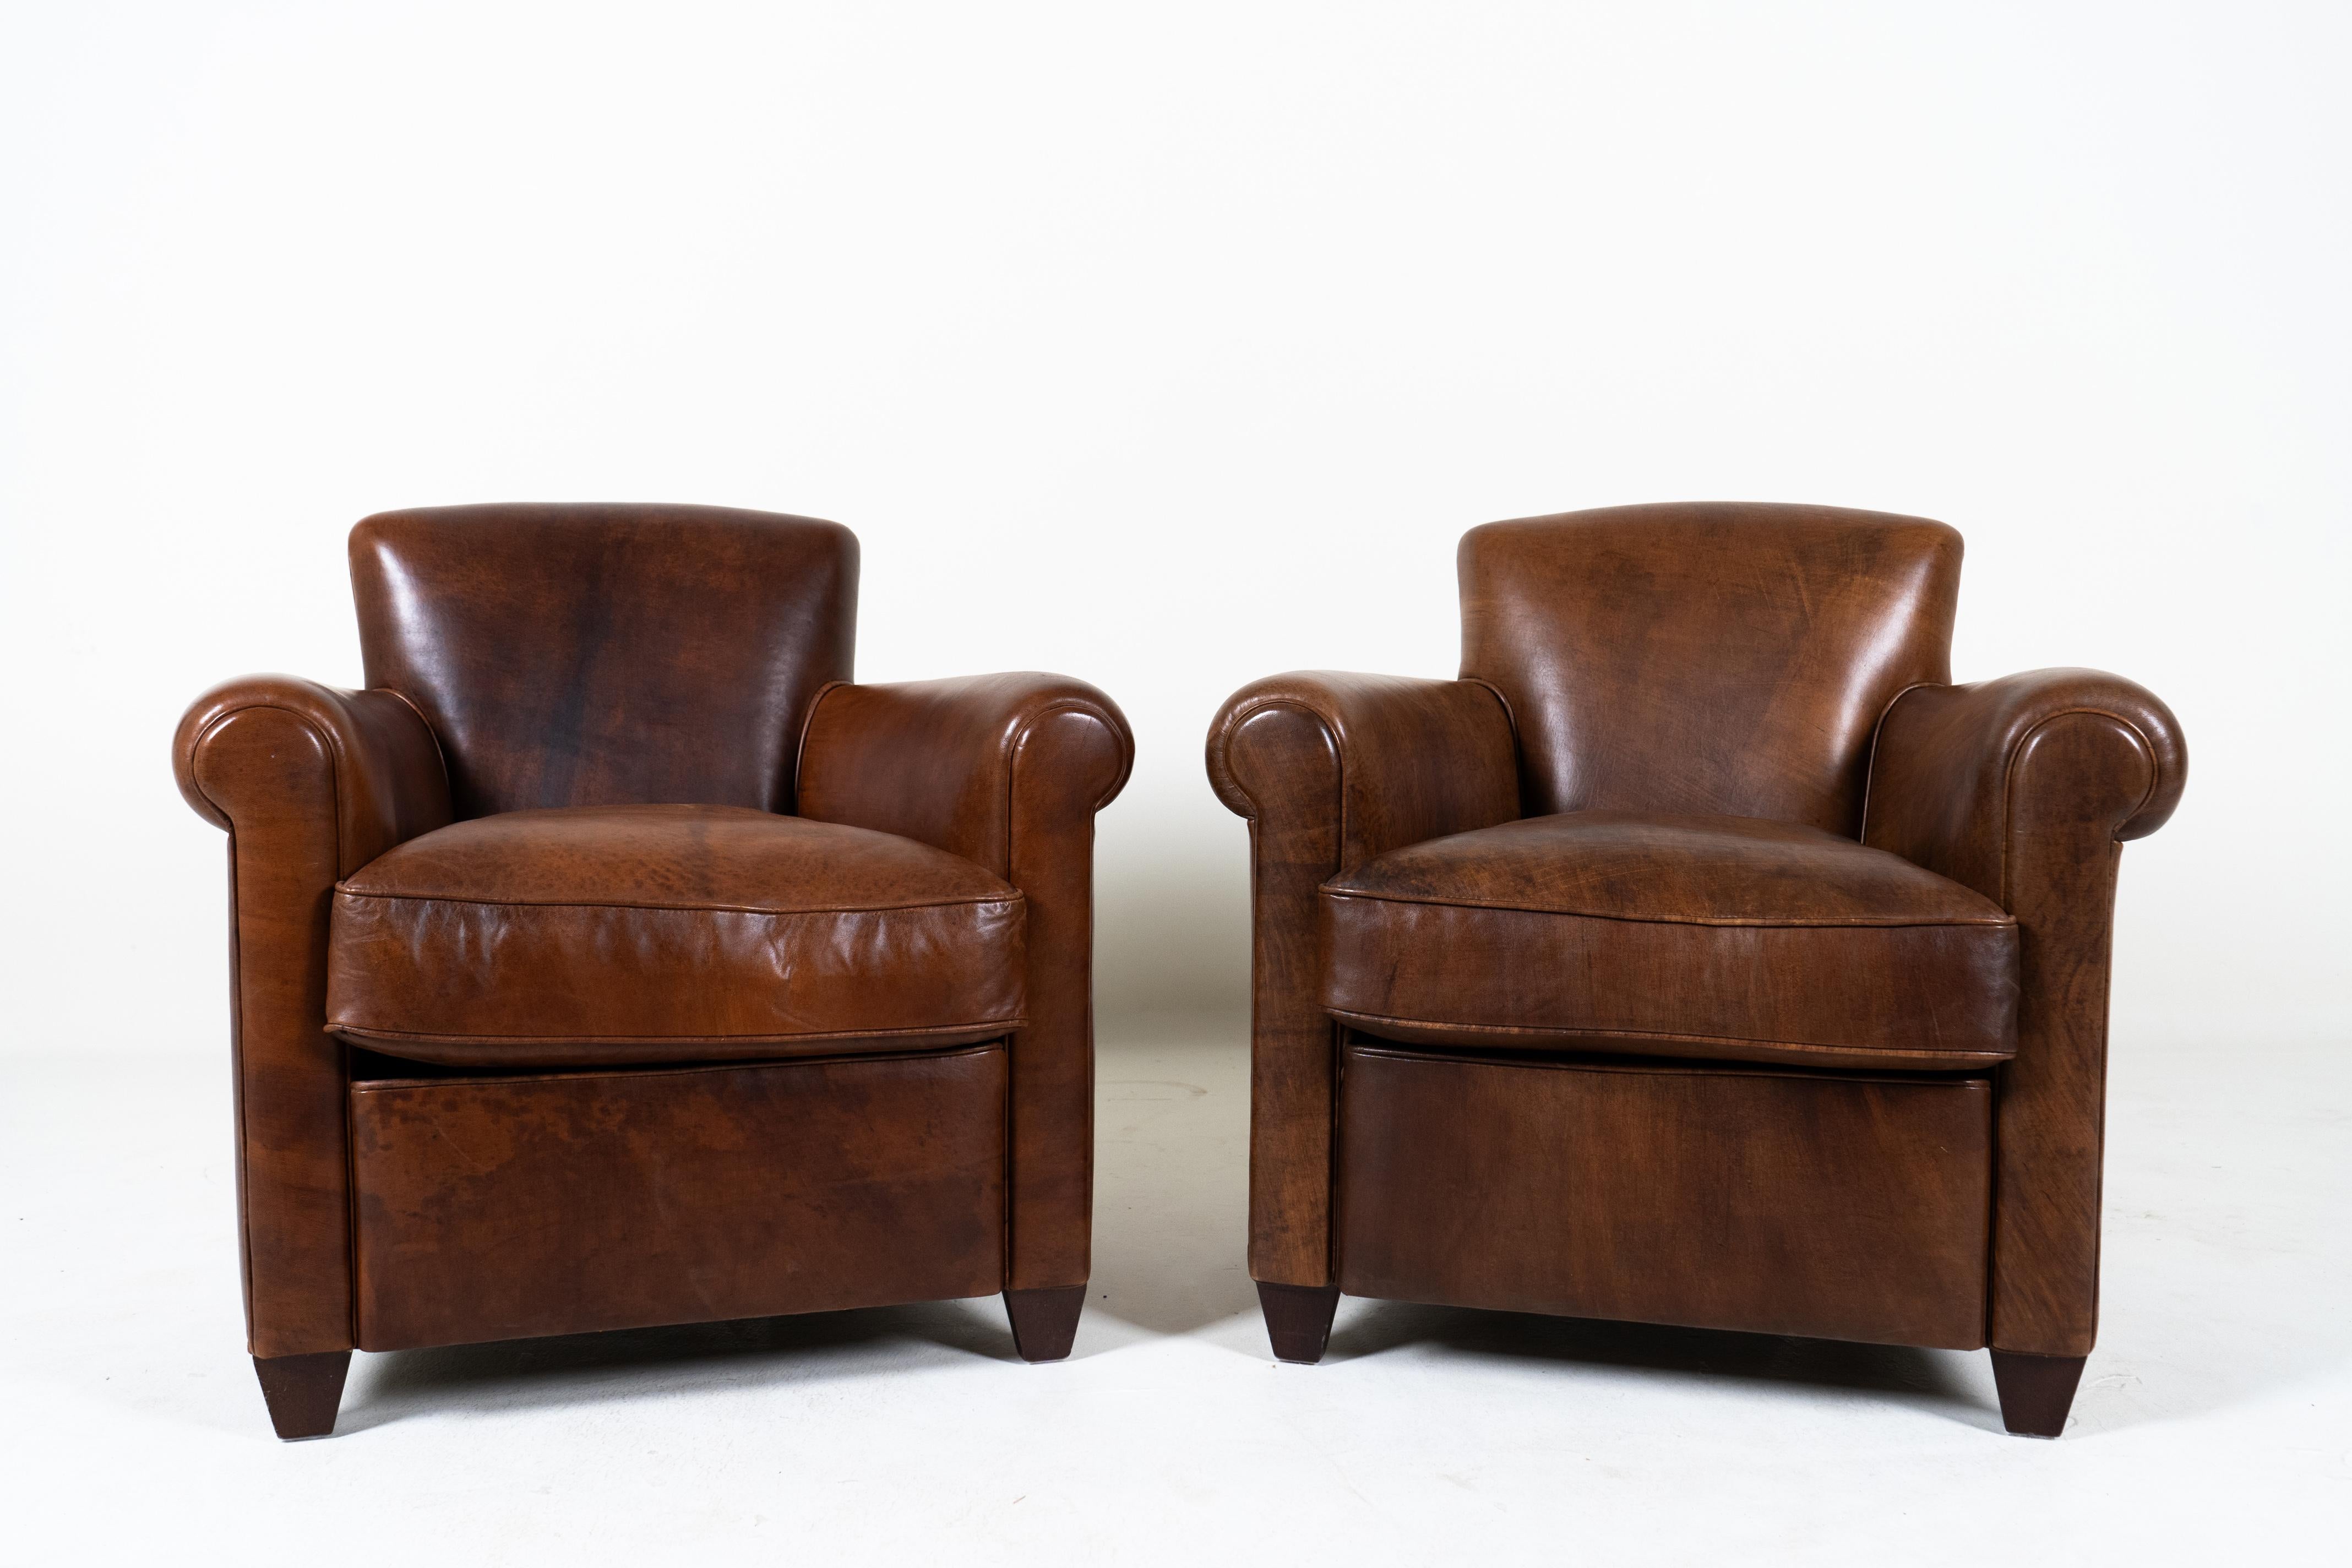 This pair of contemporary French Art Deco club chairs are a special find. With a design dating to the Art Deco period of the 1920s-1940s, these chairs define an era of Parisian elegance and comfort. The delicate nut-brown color has a beautiful